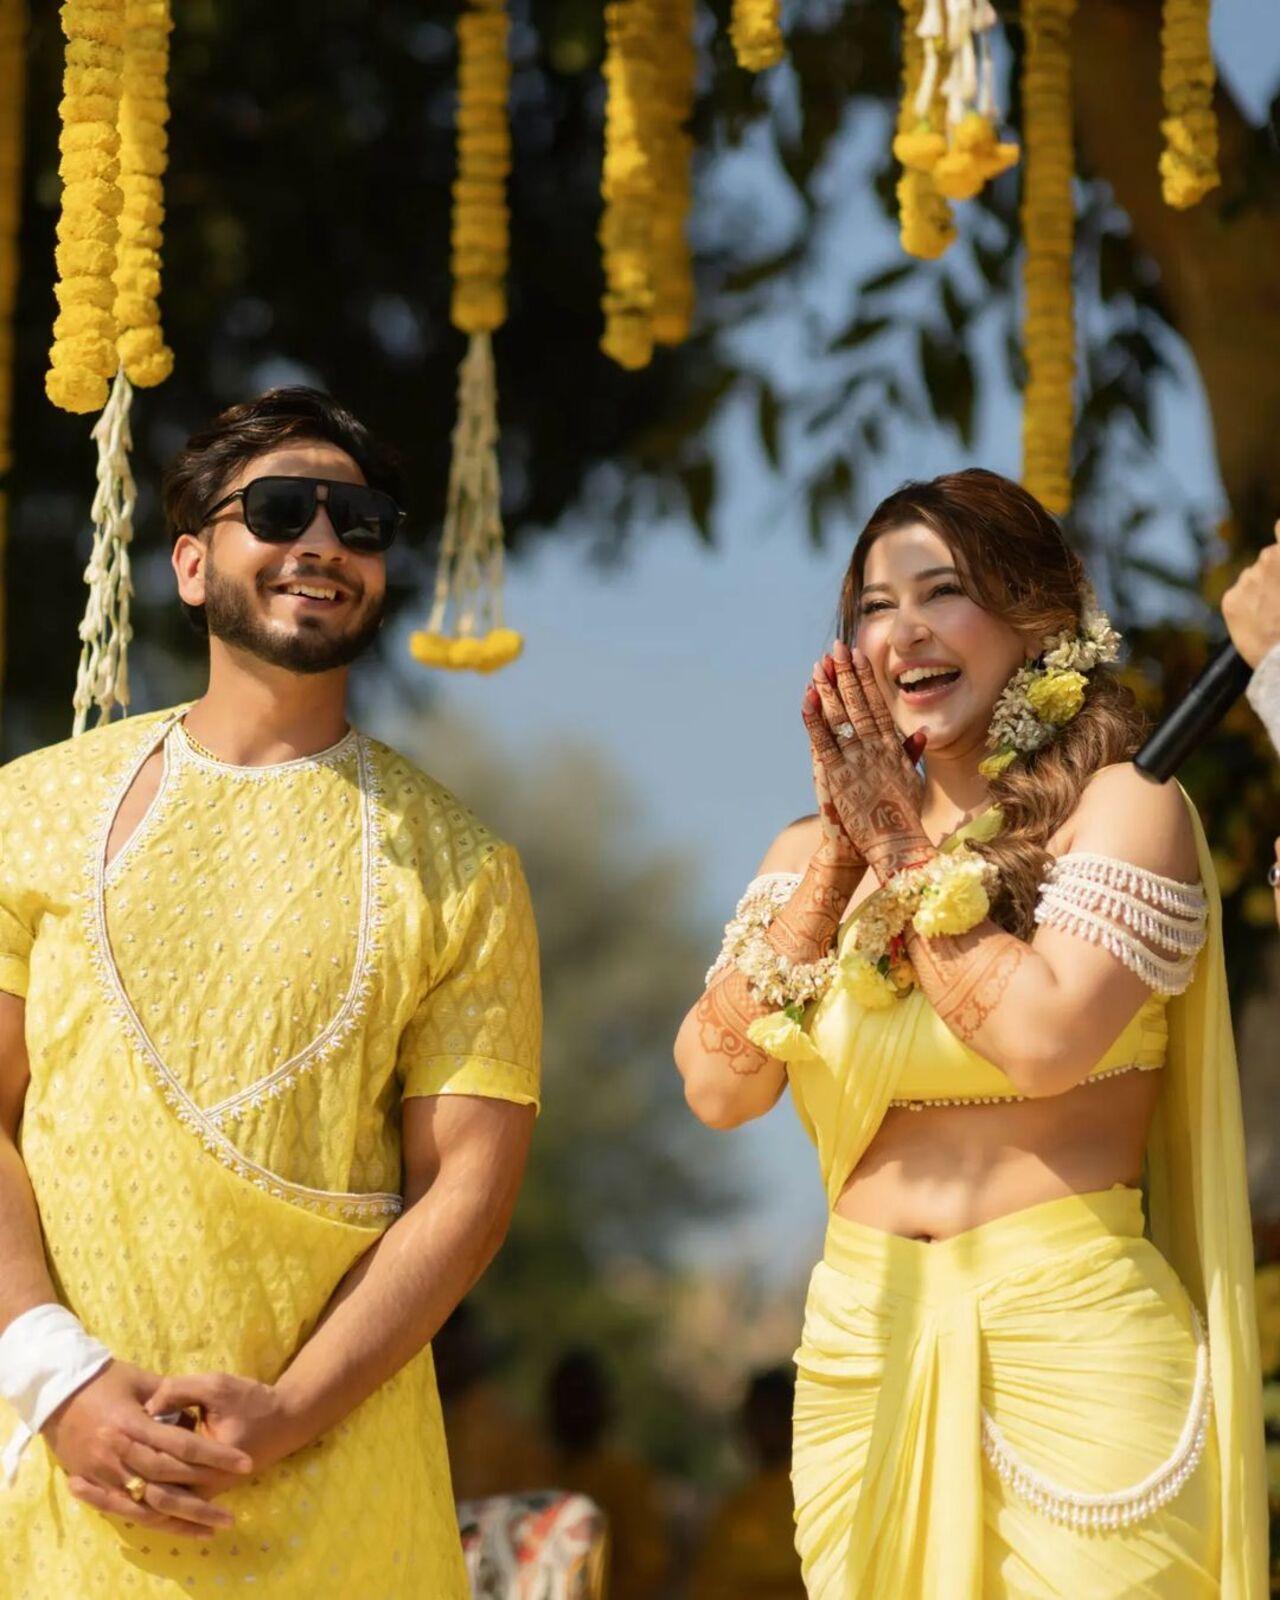 Sonarika shared some beautiful snaps from the haldi ceremony that was organised at an open space near the wedding venue